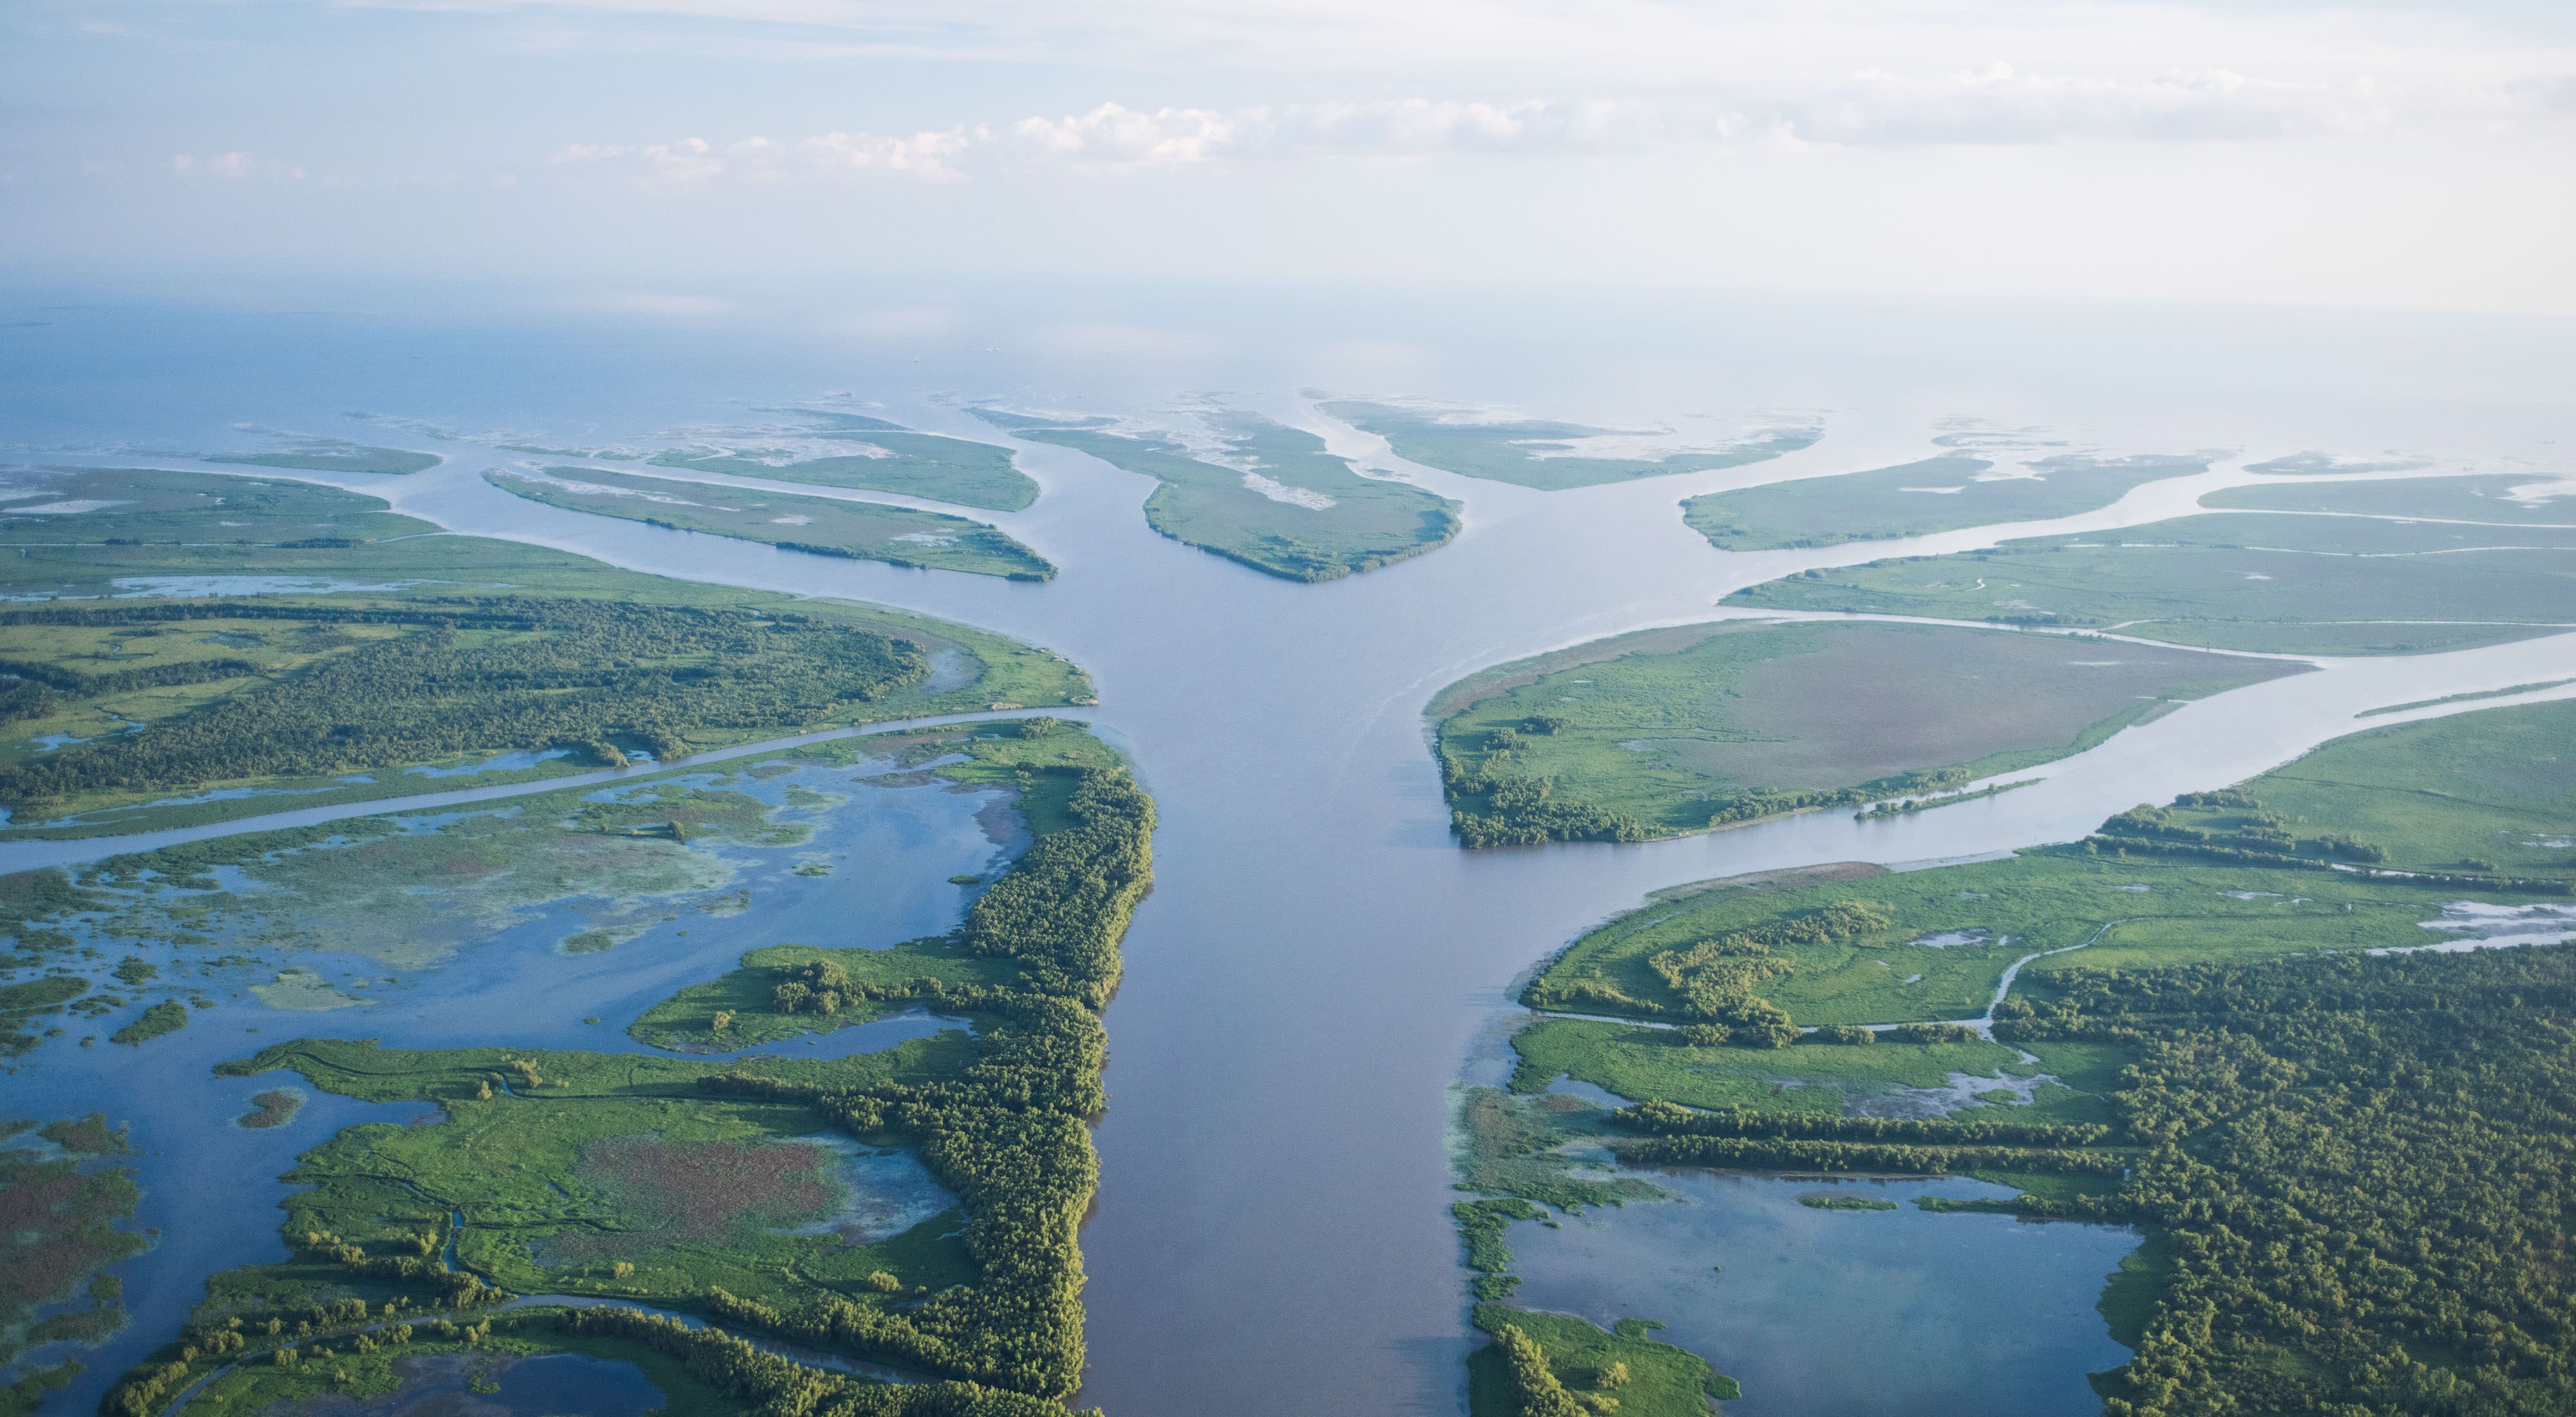 Aerial photo of the view looking south toward the Gulf of Mexico down the Wax Lake Delta, Louisiana.